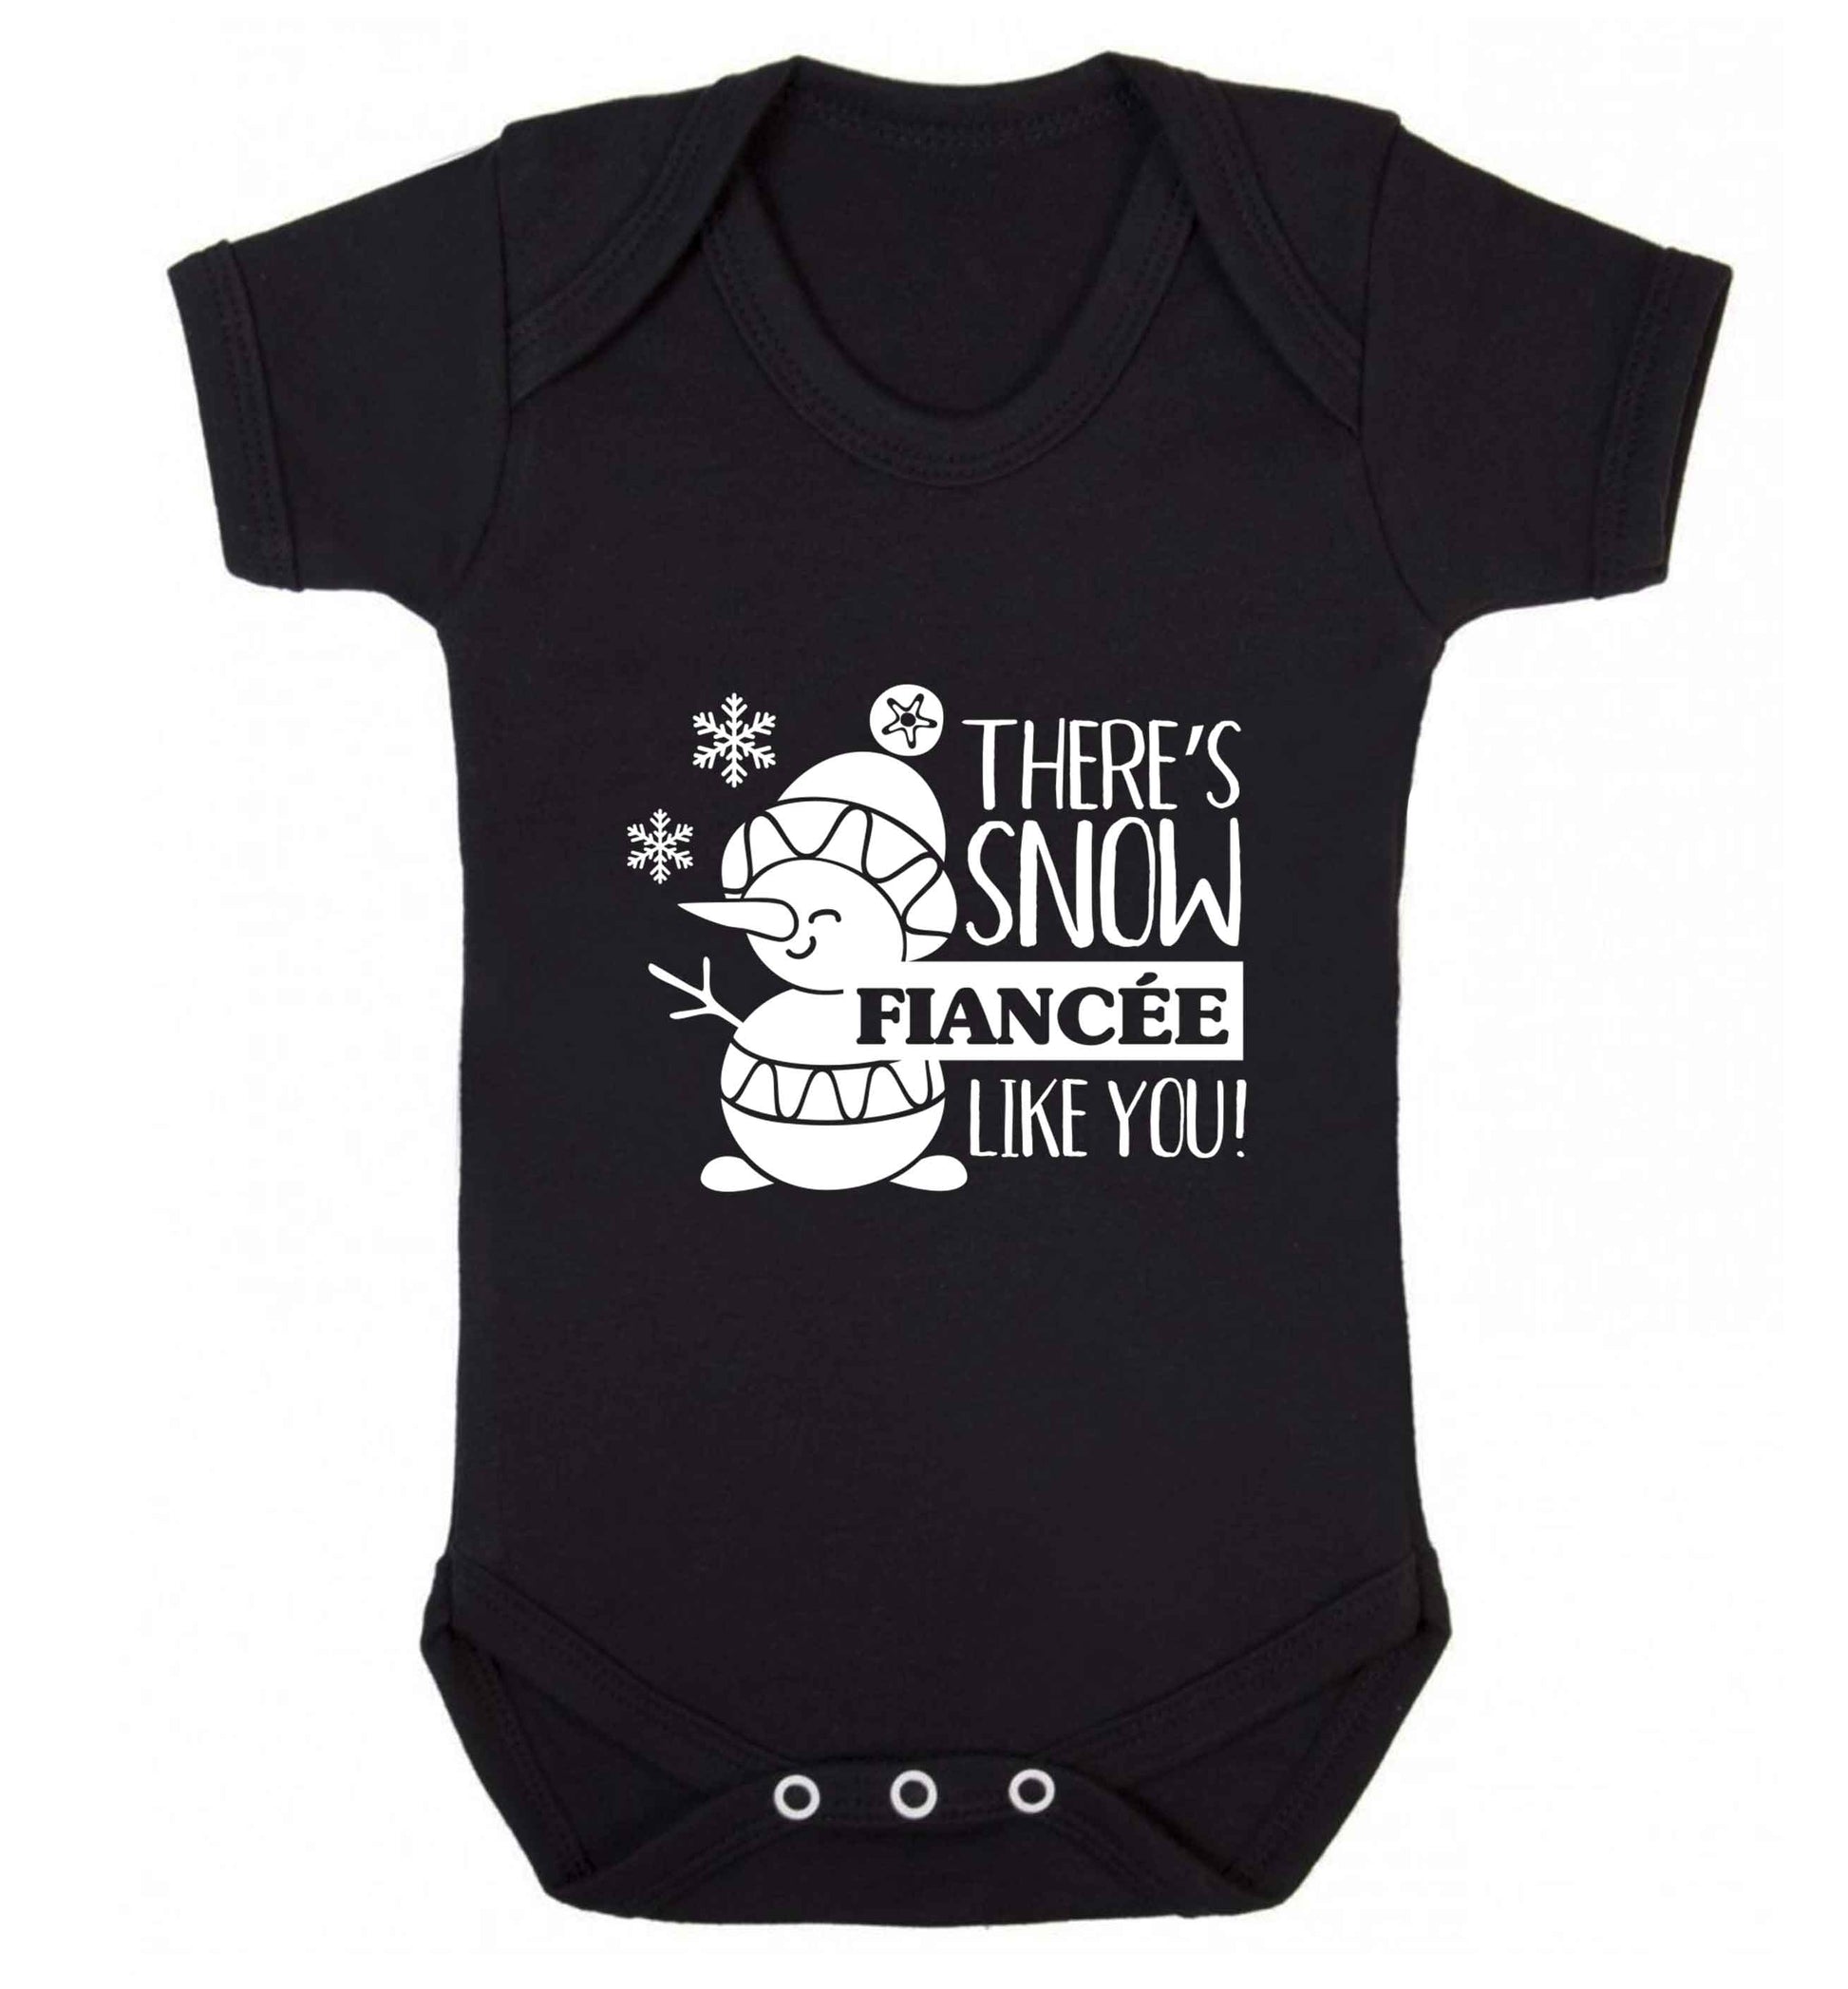 There's snow fiancee like you baby vest black 18-24 months